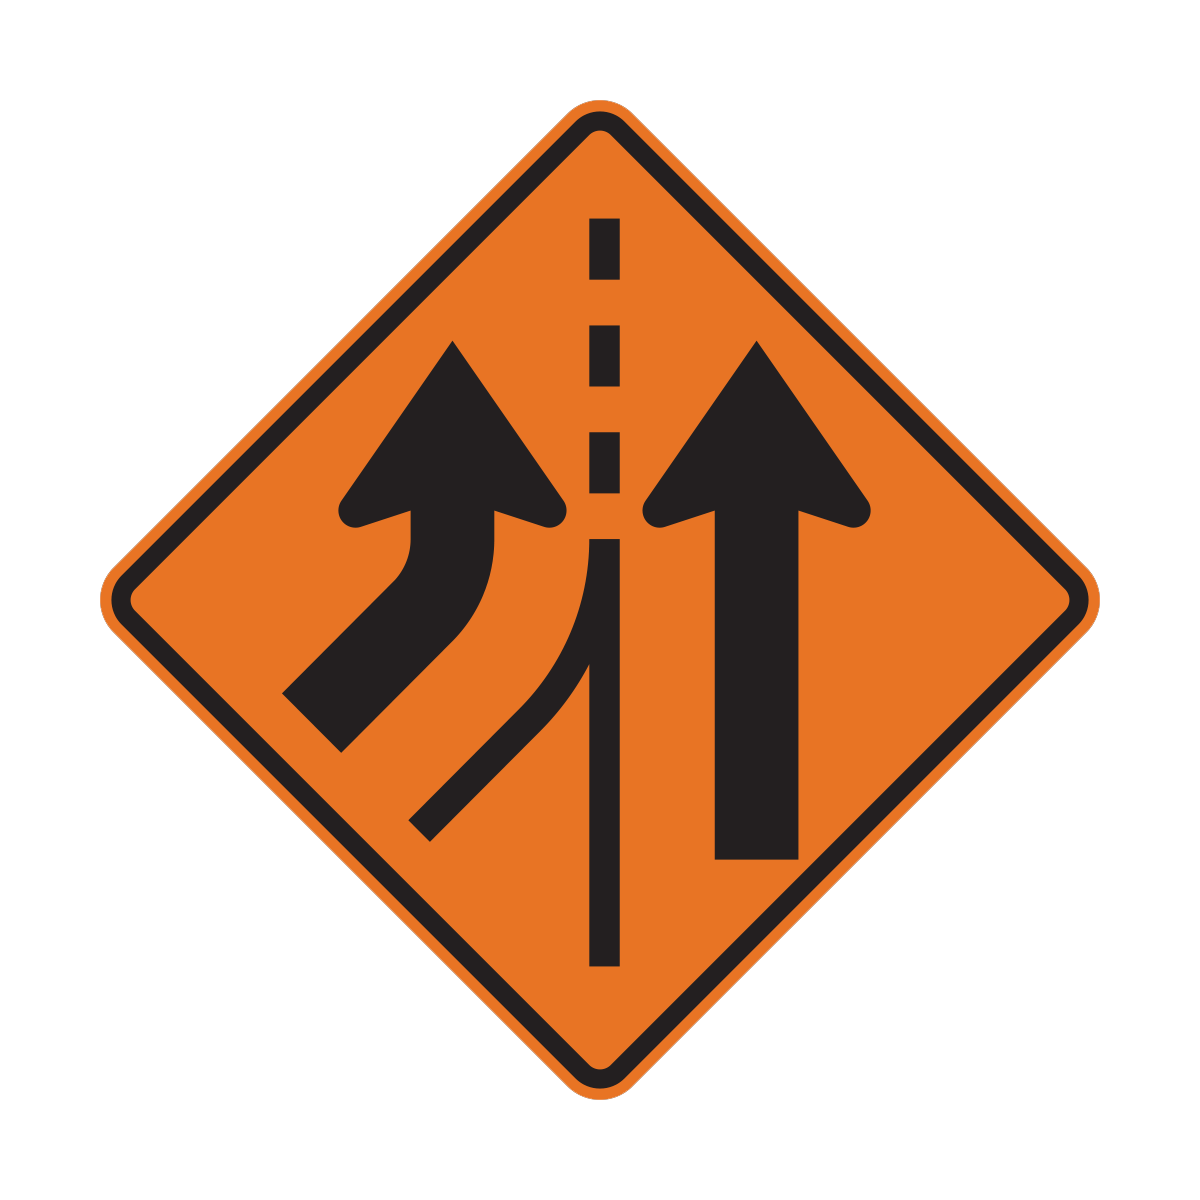 Added Lane Construction Road Sign (W4-3)